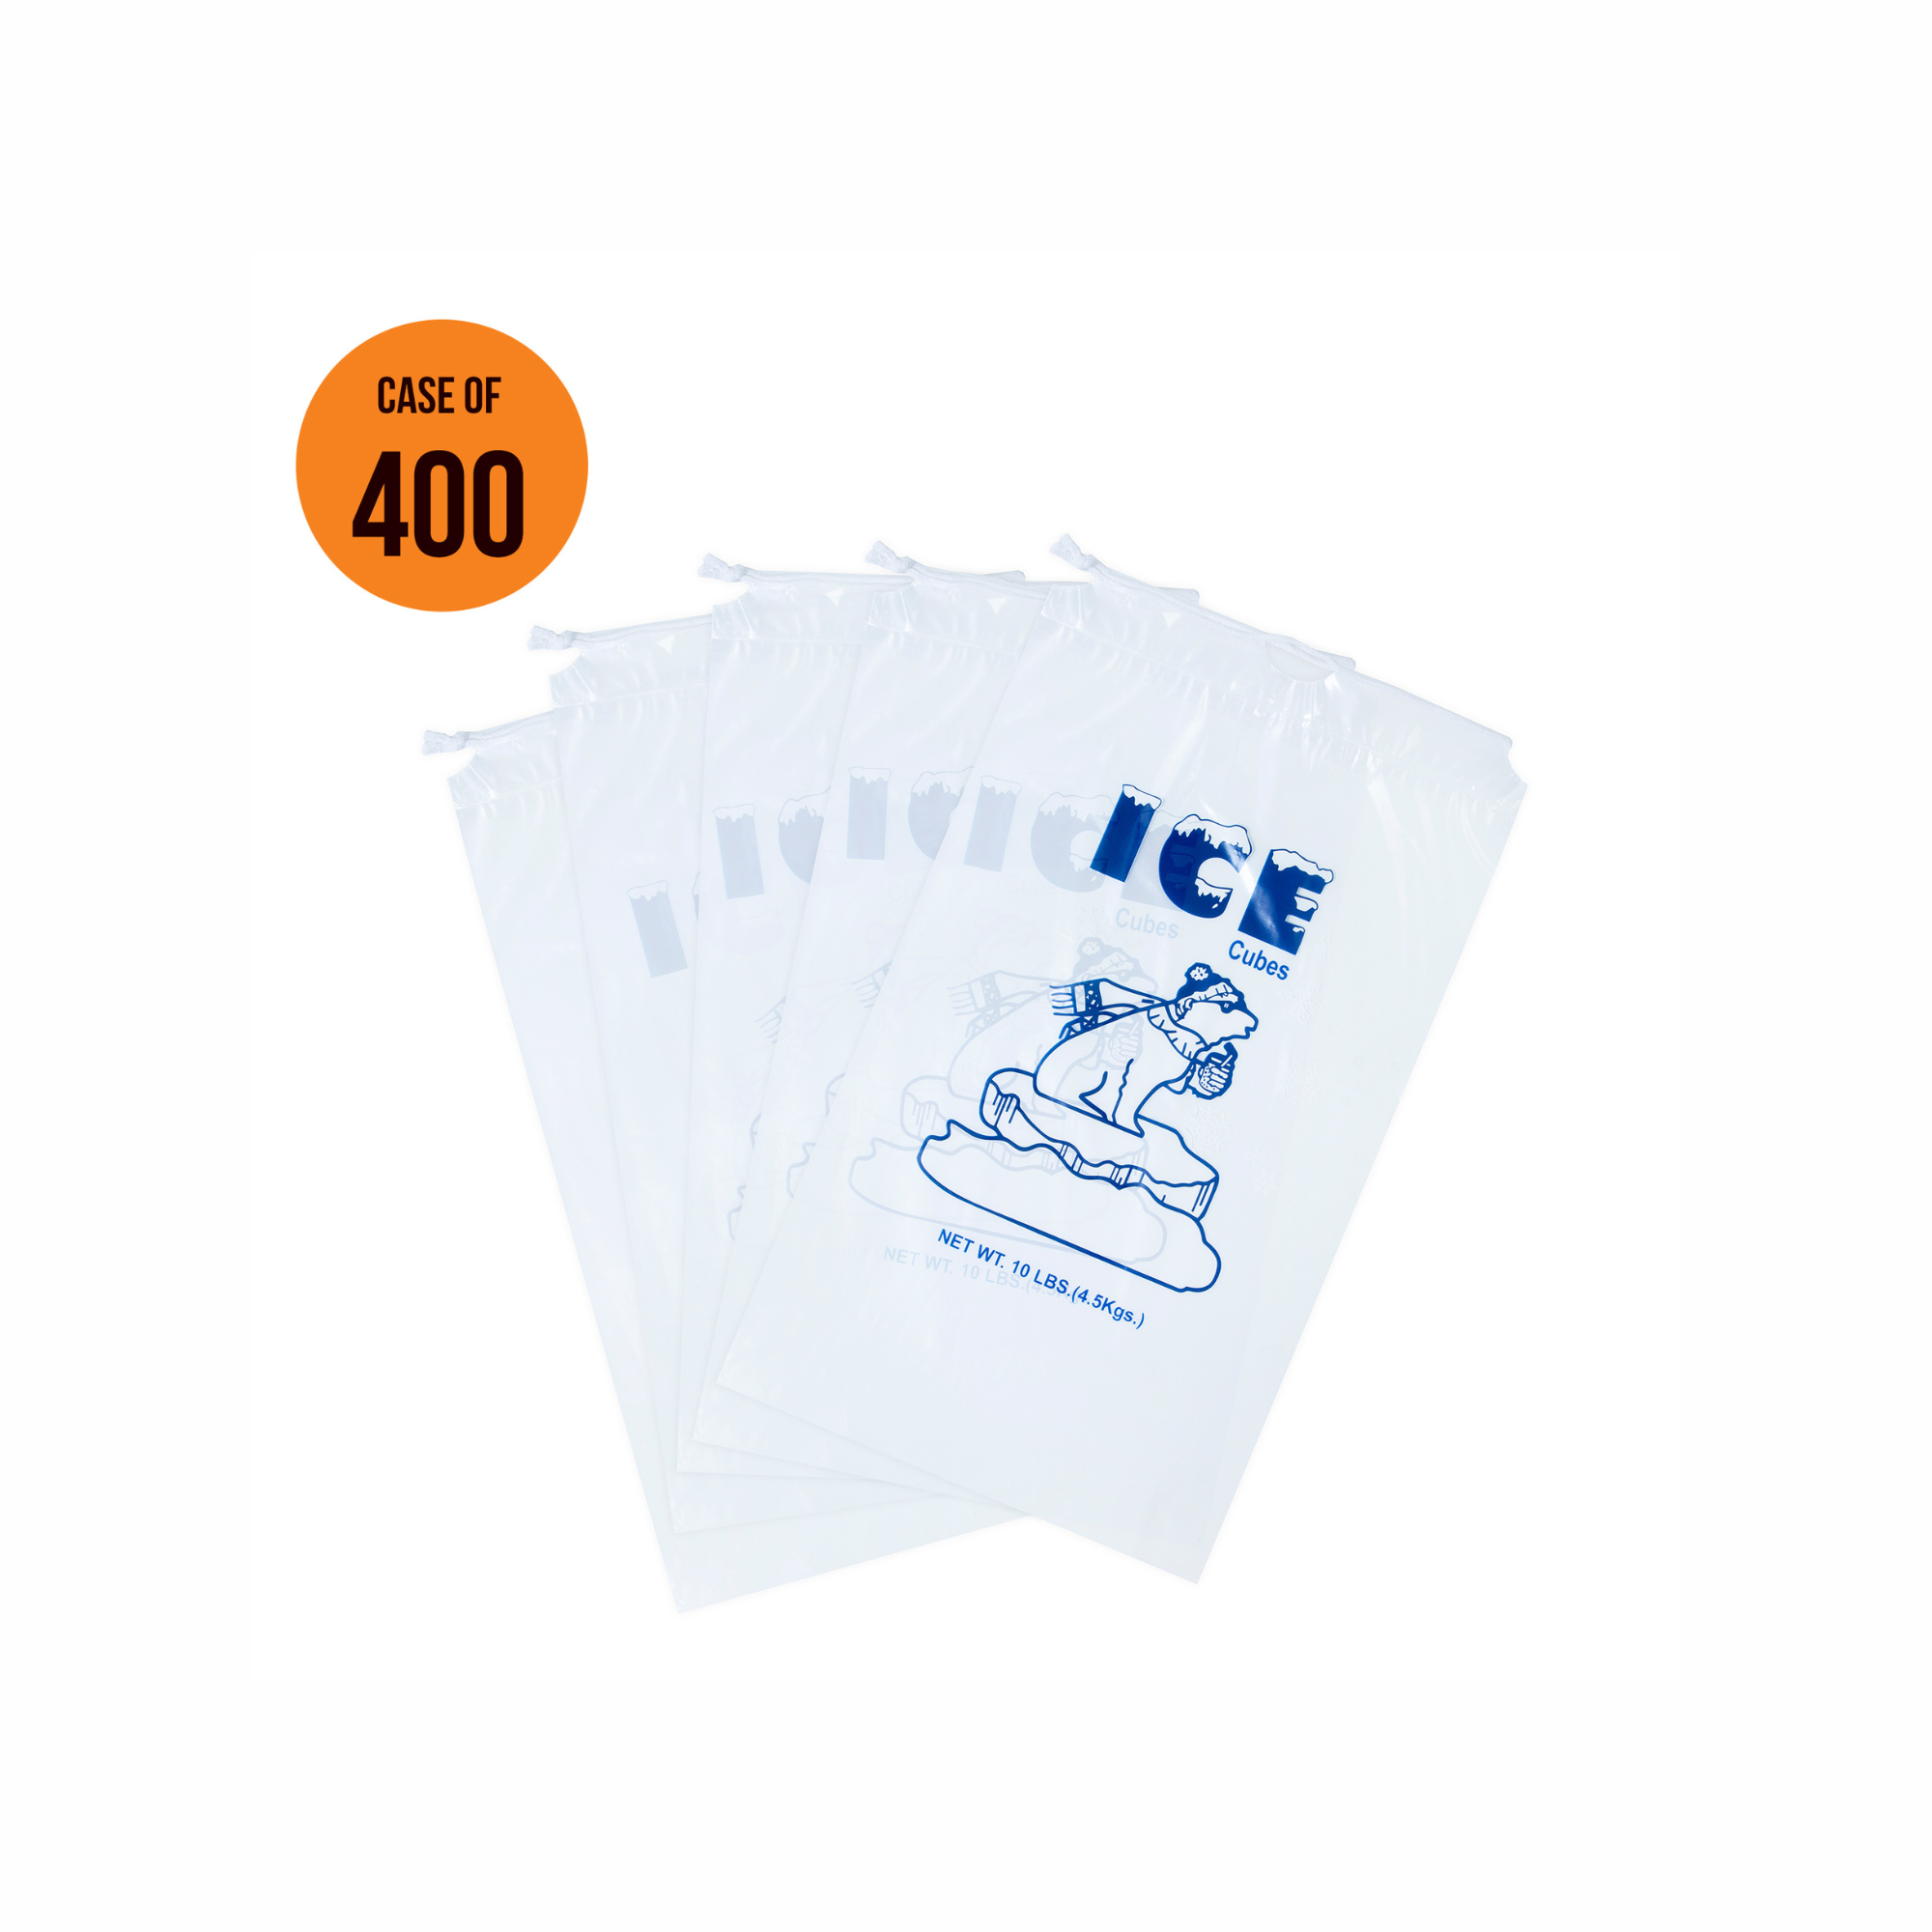 10 Lbs Pack of 400 Ice Bags With Cotton Drawstring - Ice Cube Bags - Infinite Pack